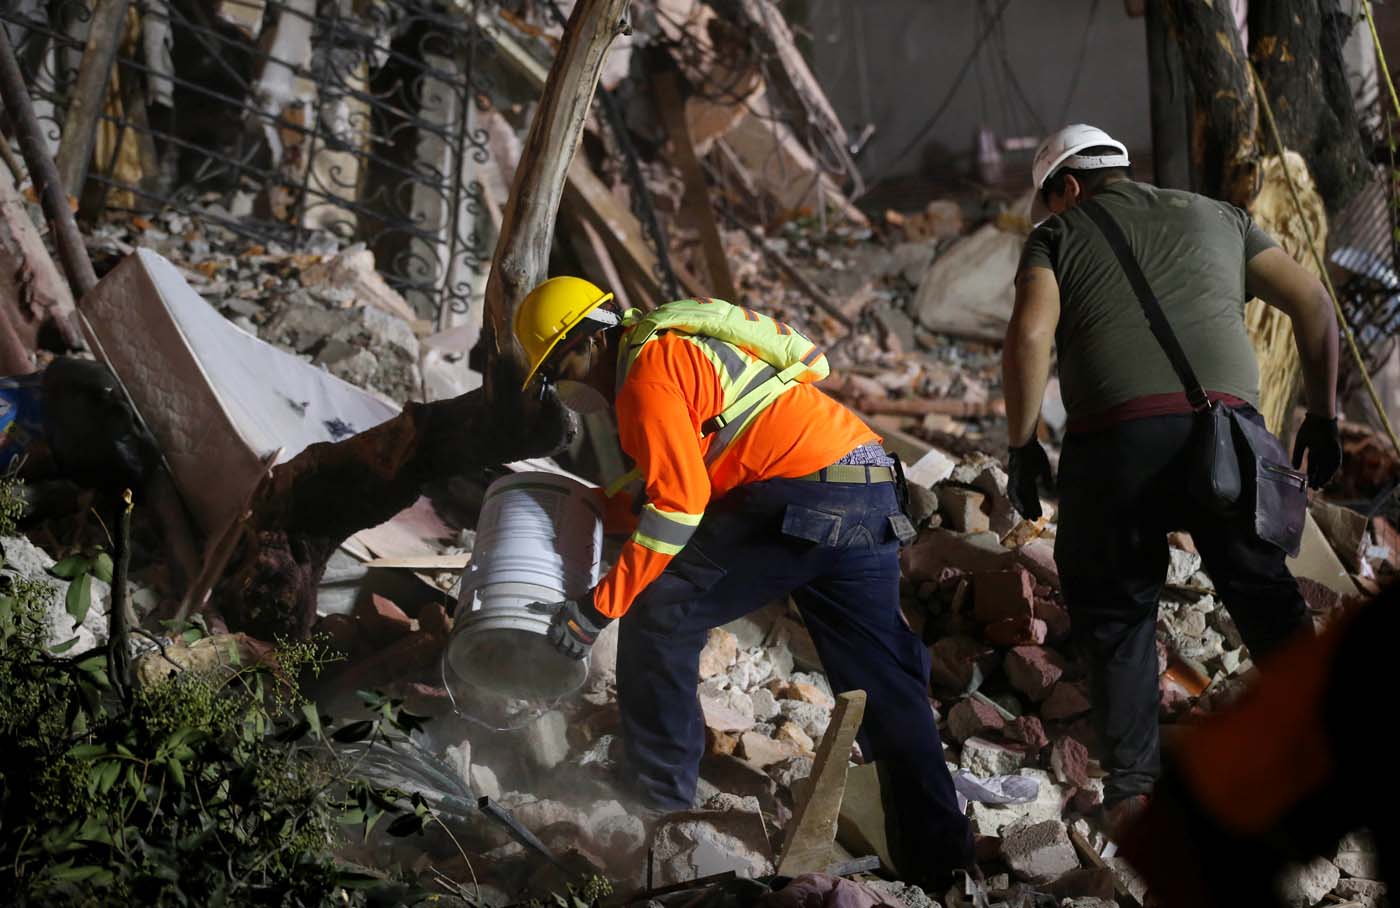 Rescuers remove debris at the site of a collapsed building after an earthquake in Mexico City, Mexico September 20, 2017. REUTERS/Henry Romero